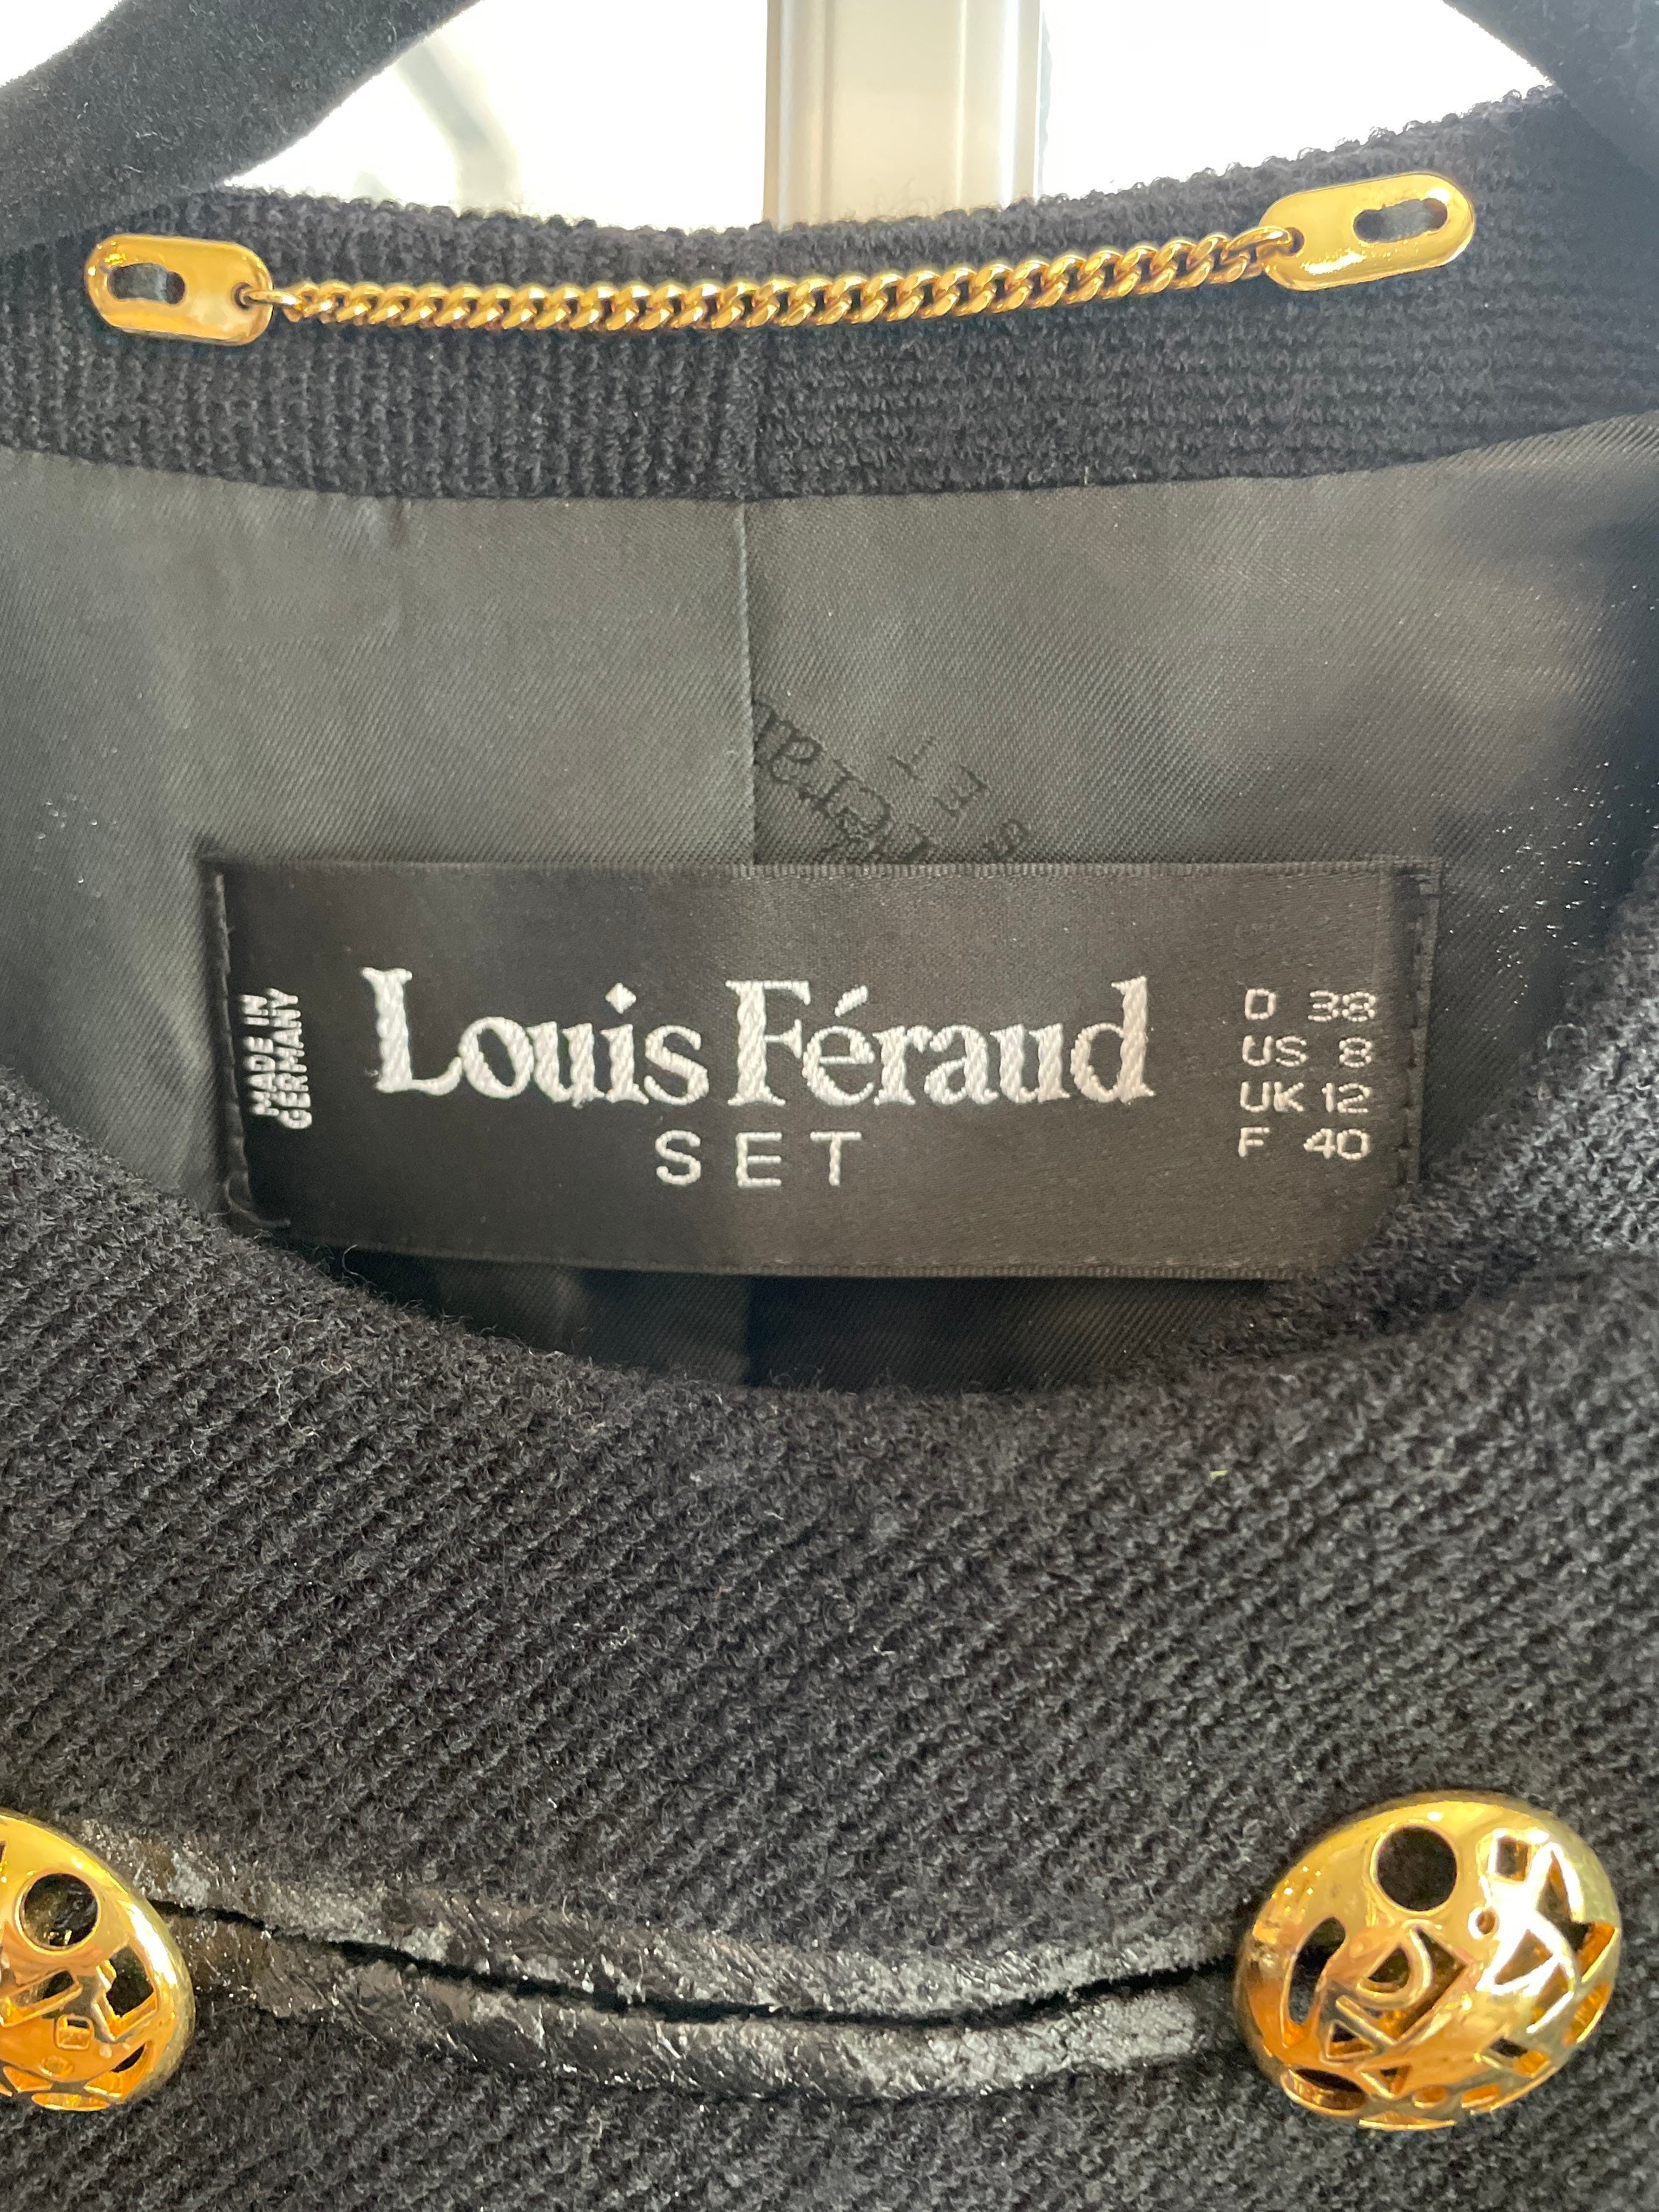 Authentic and beautiful LOUIS FERAUD leather bag bag